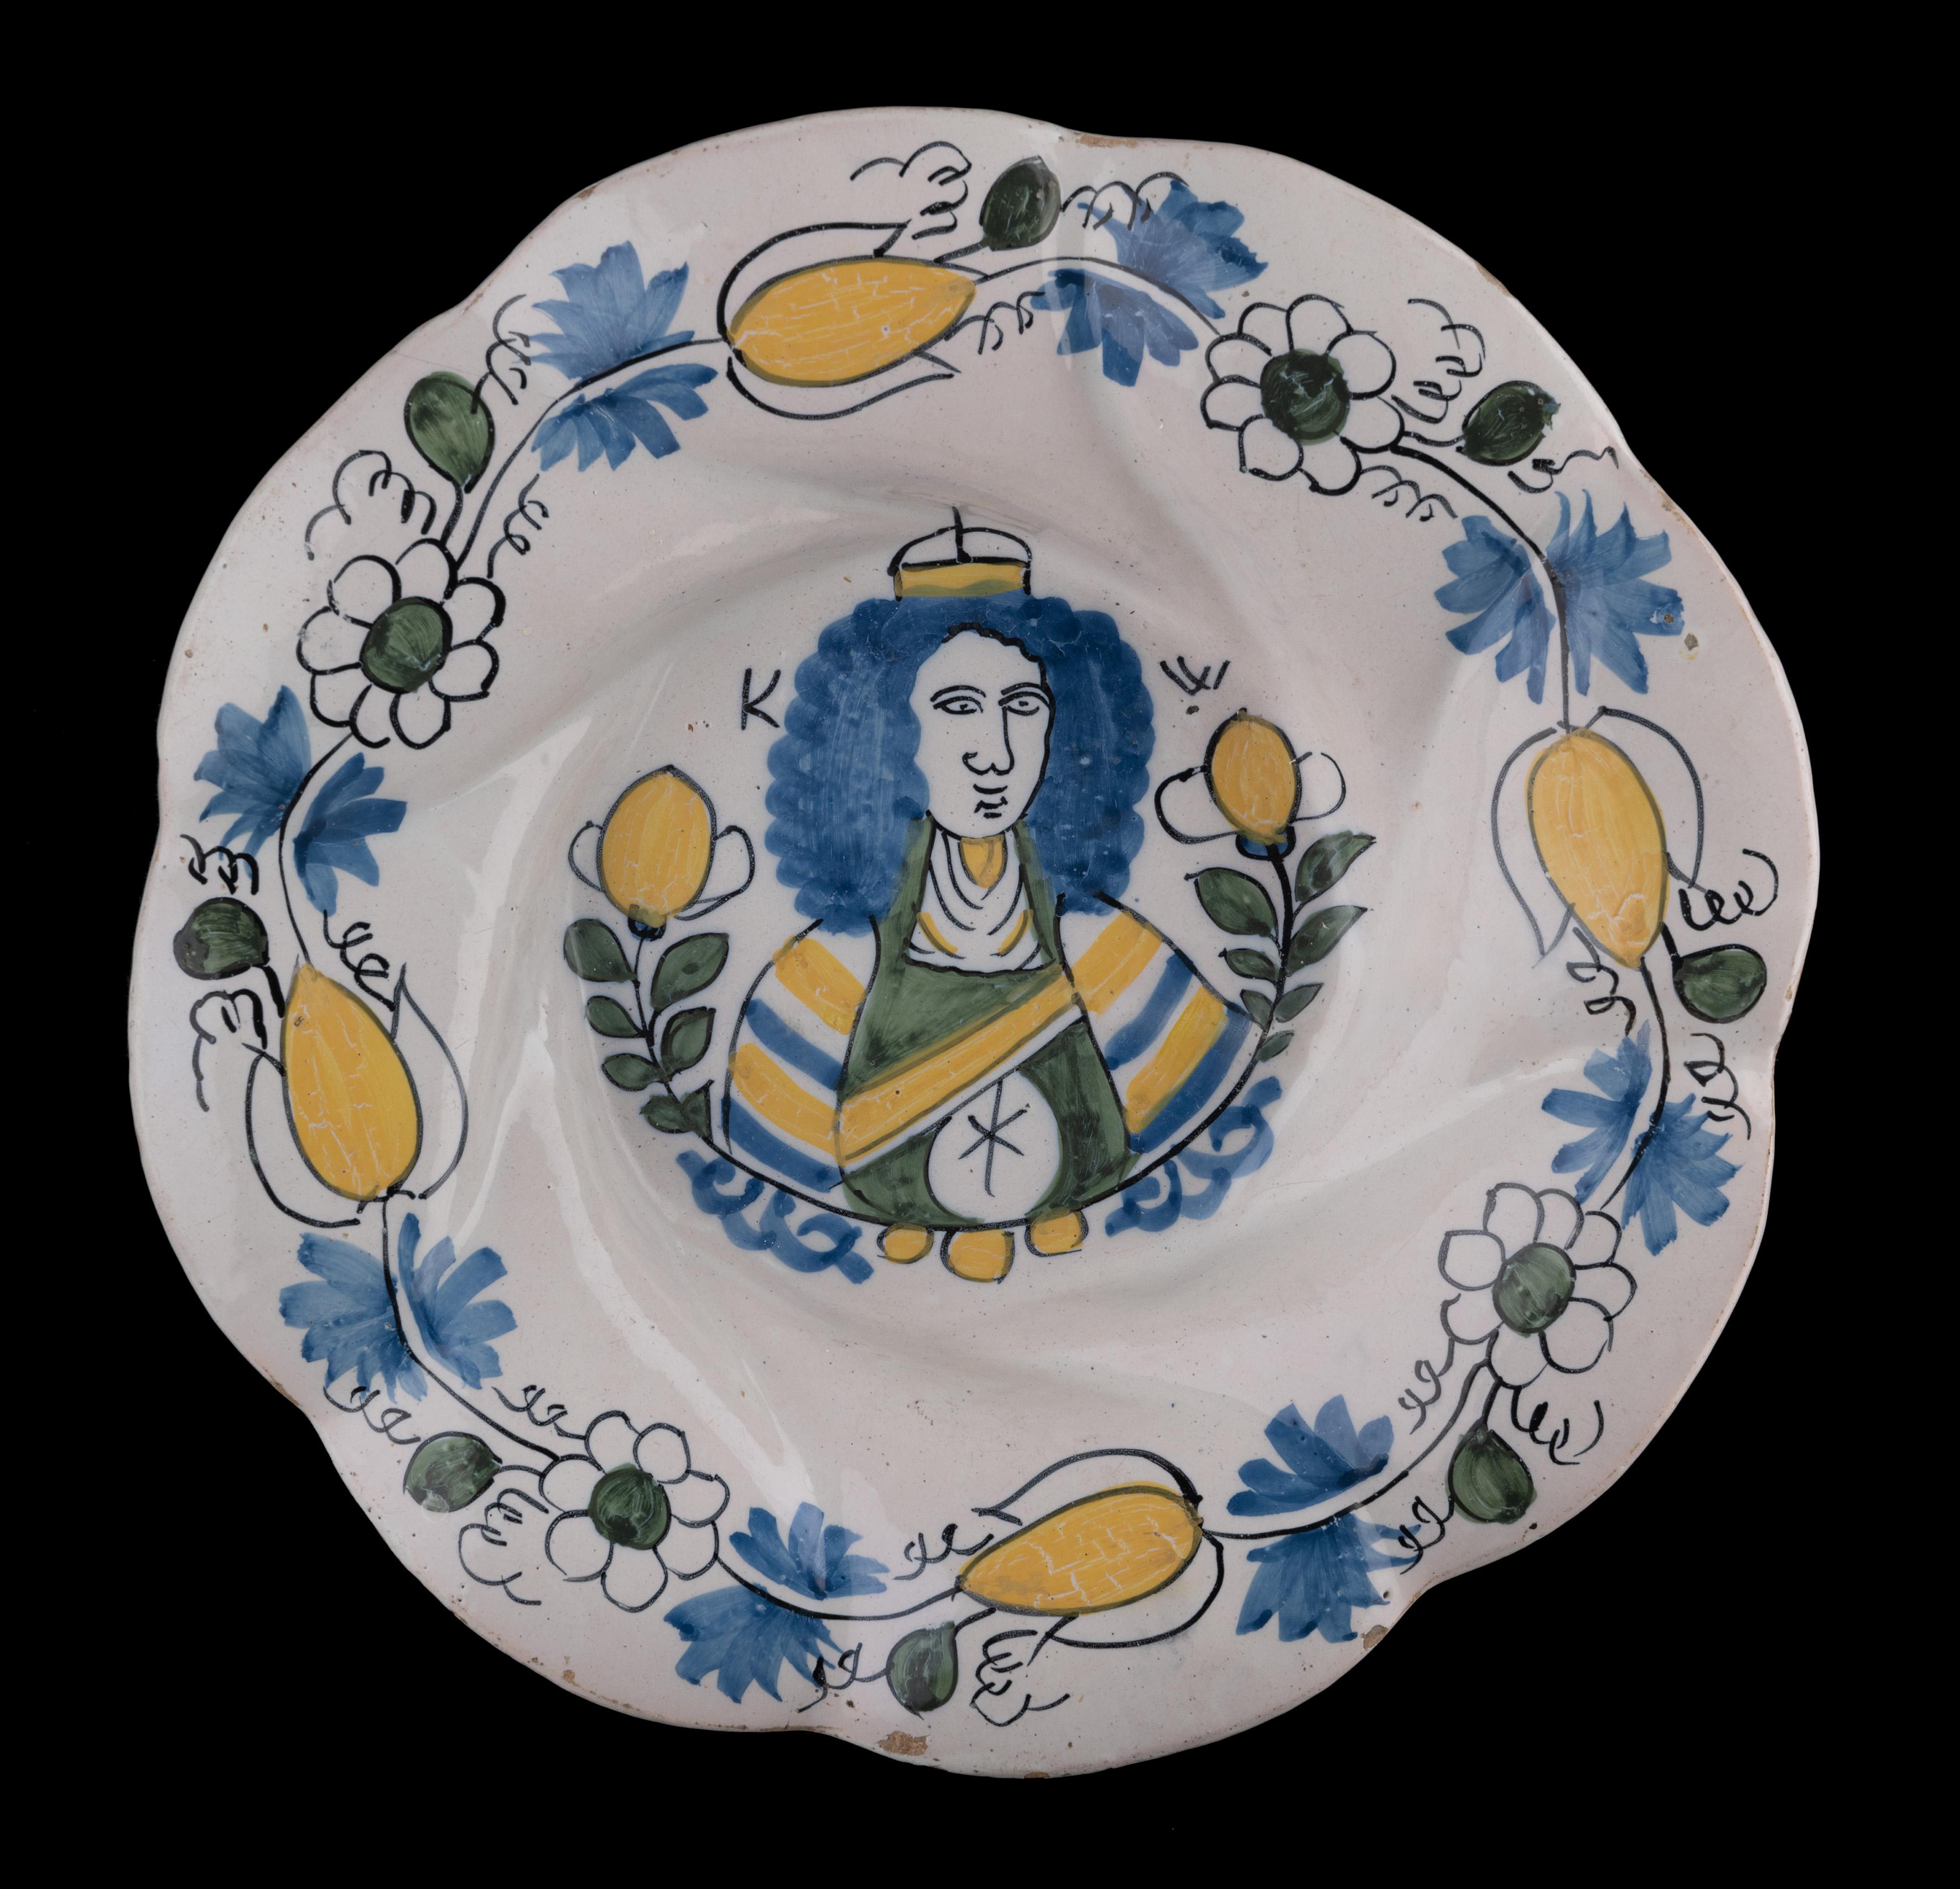 Polychrome lobed dish with King William III
Delft, circa 1690

The polychrome lobed dish is composed of eight wide and twisted lobes and is painted in blue, green and yellow with a depiction of King-Stadholder William III between two flowering